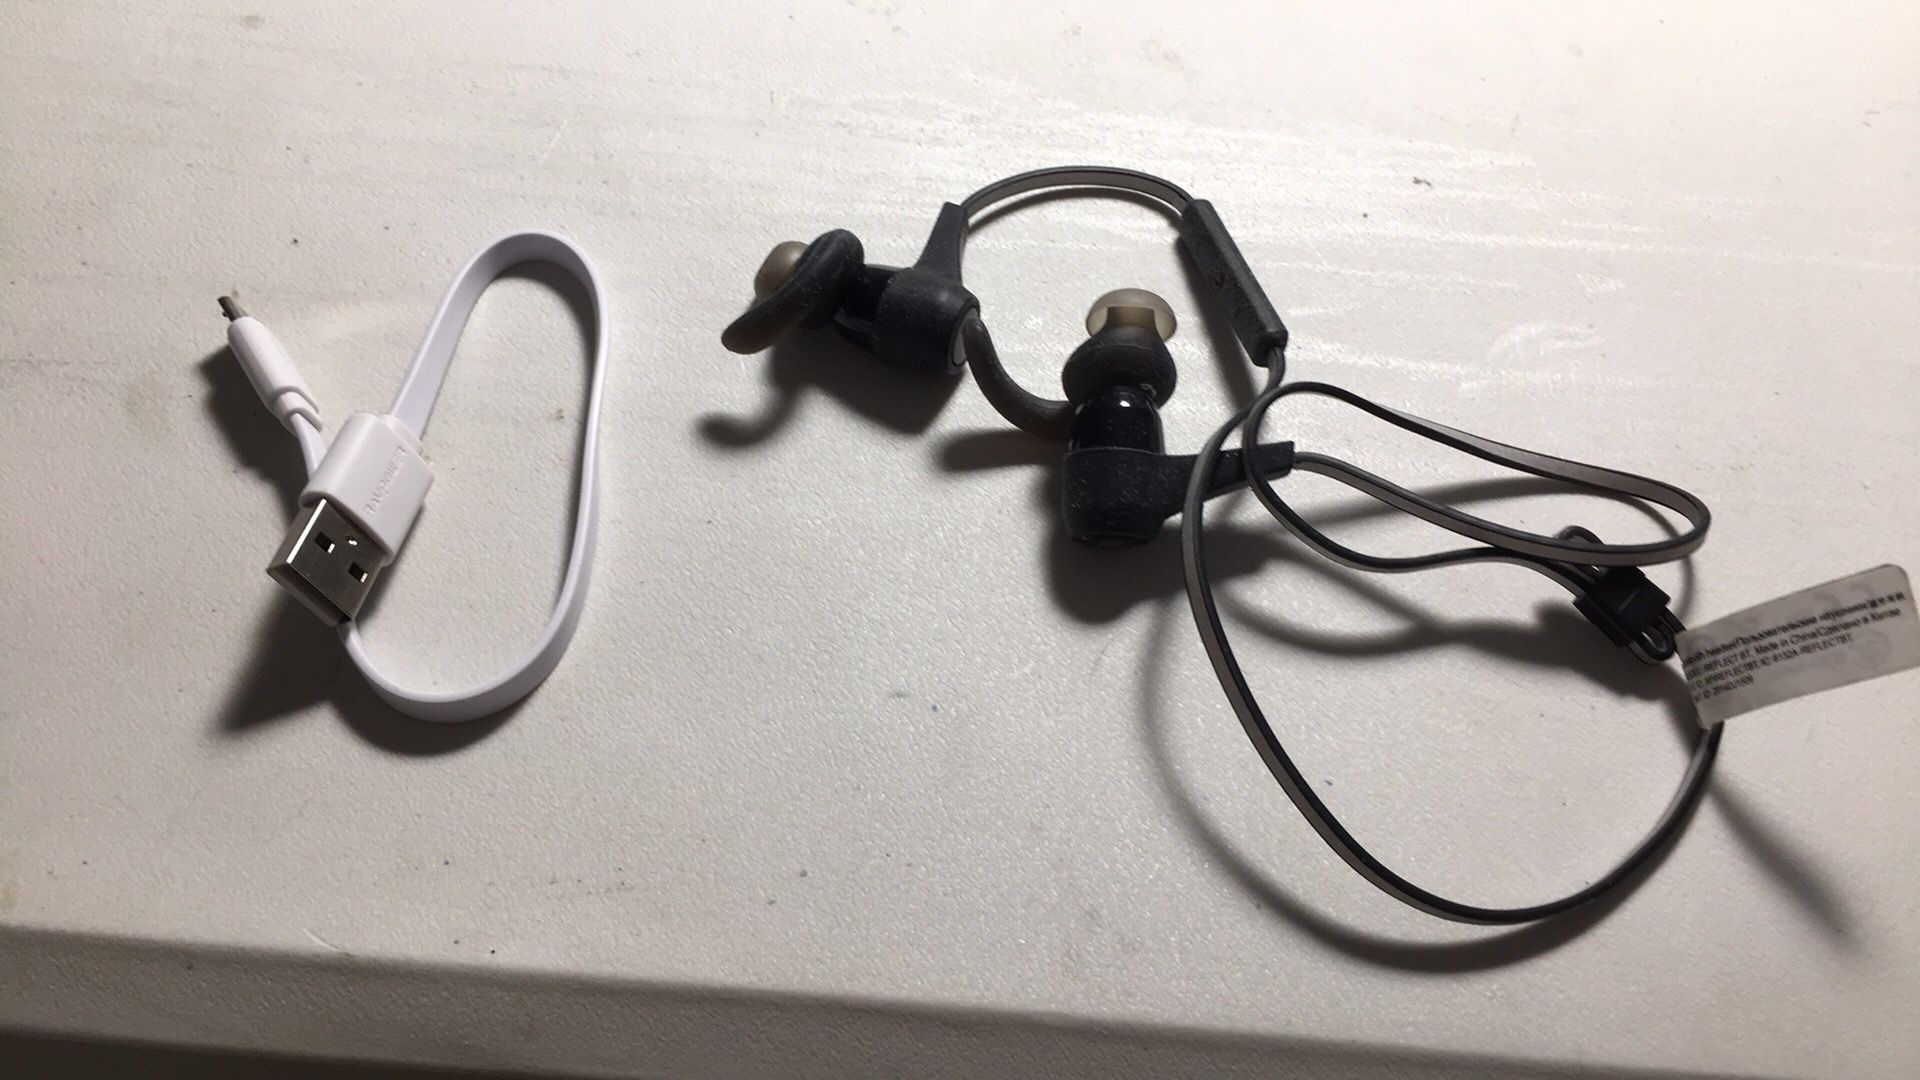 JBL Reflect Bluetooth inear earphone(used) with charging cable